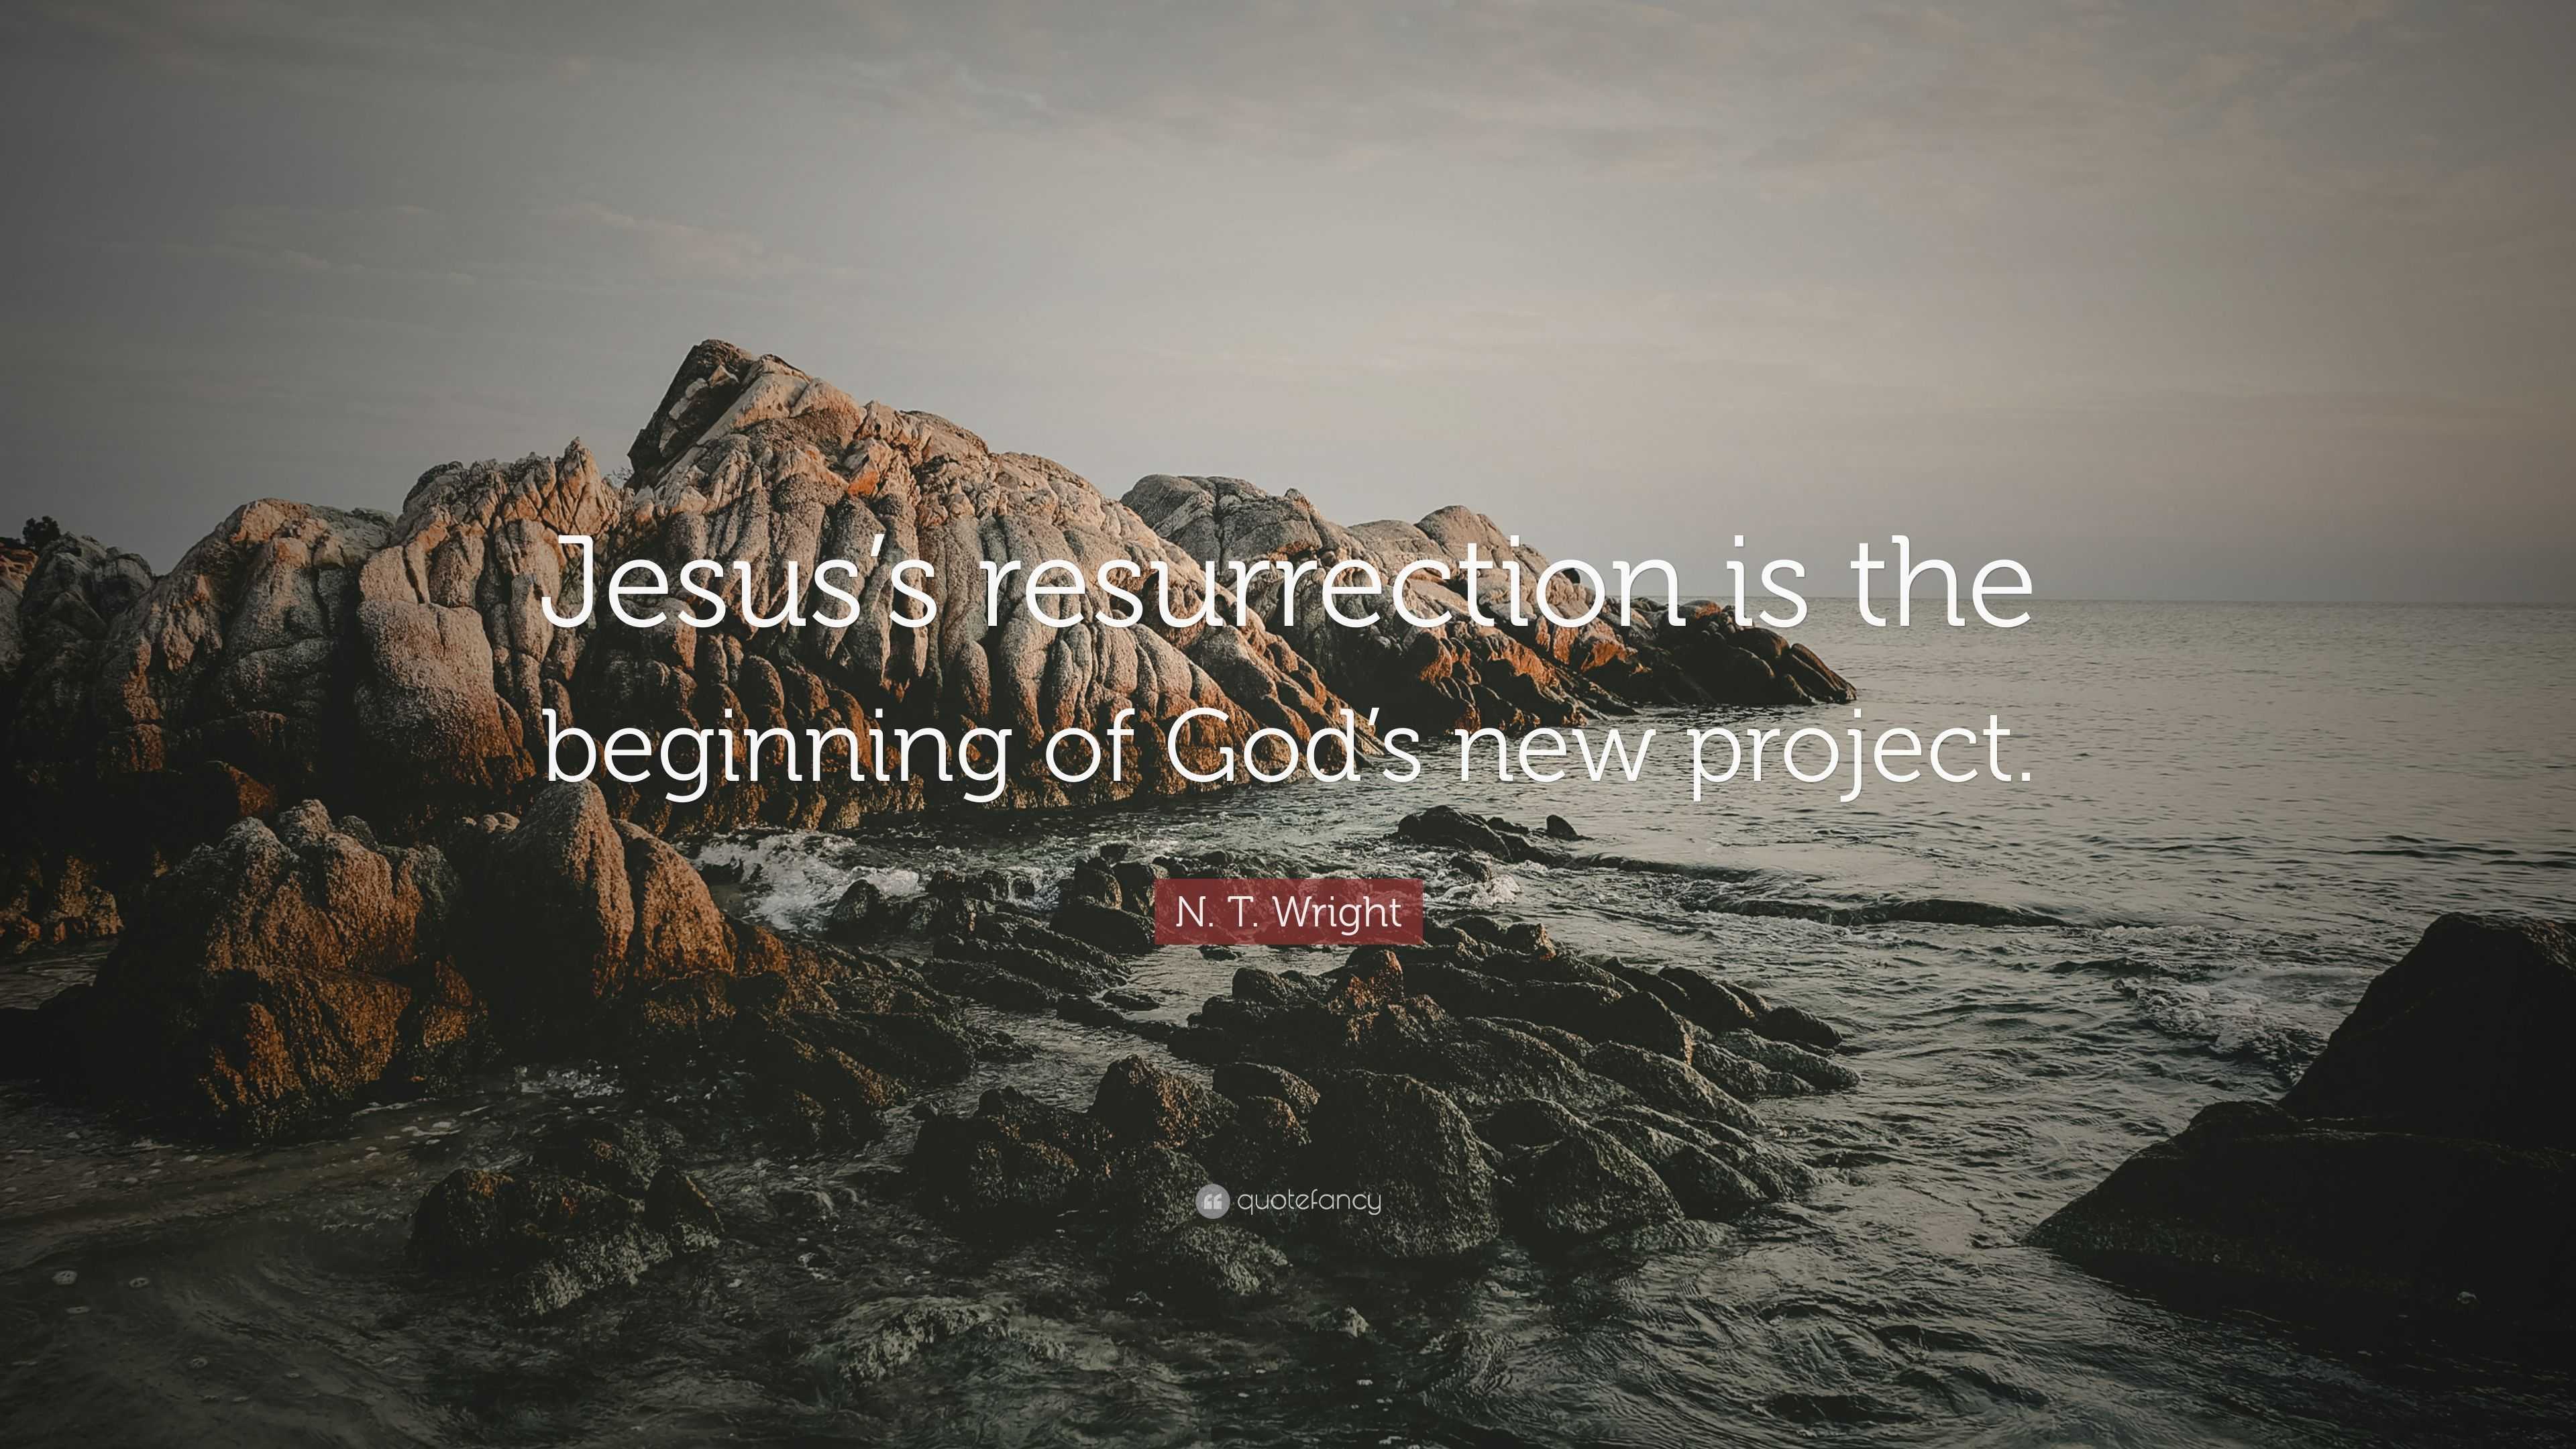 N. T. Wright Quote: “Jesus’s resurrection is the beginning of God’s new ...